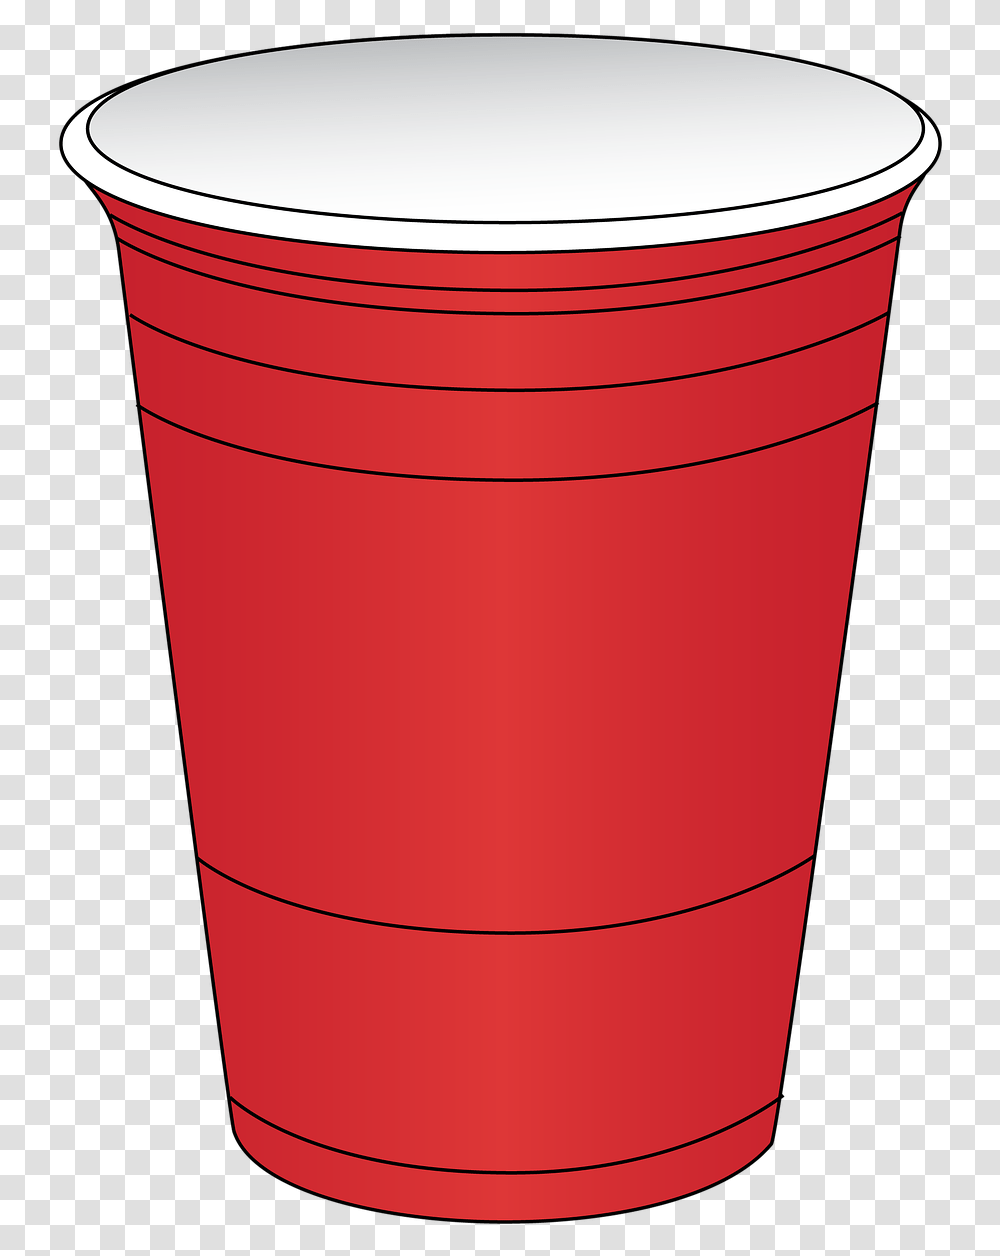 Example Of A Cup You Could Use, Bucket, Mailbox, Letterbox, Pot Transparent Png